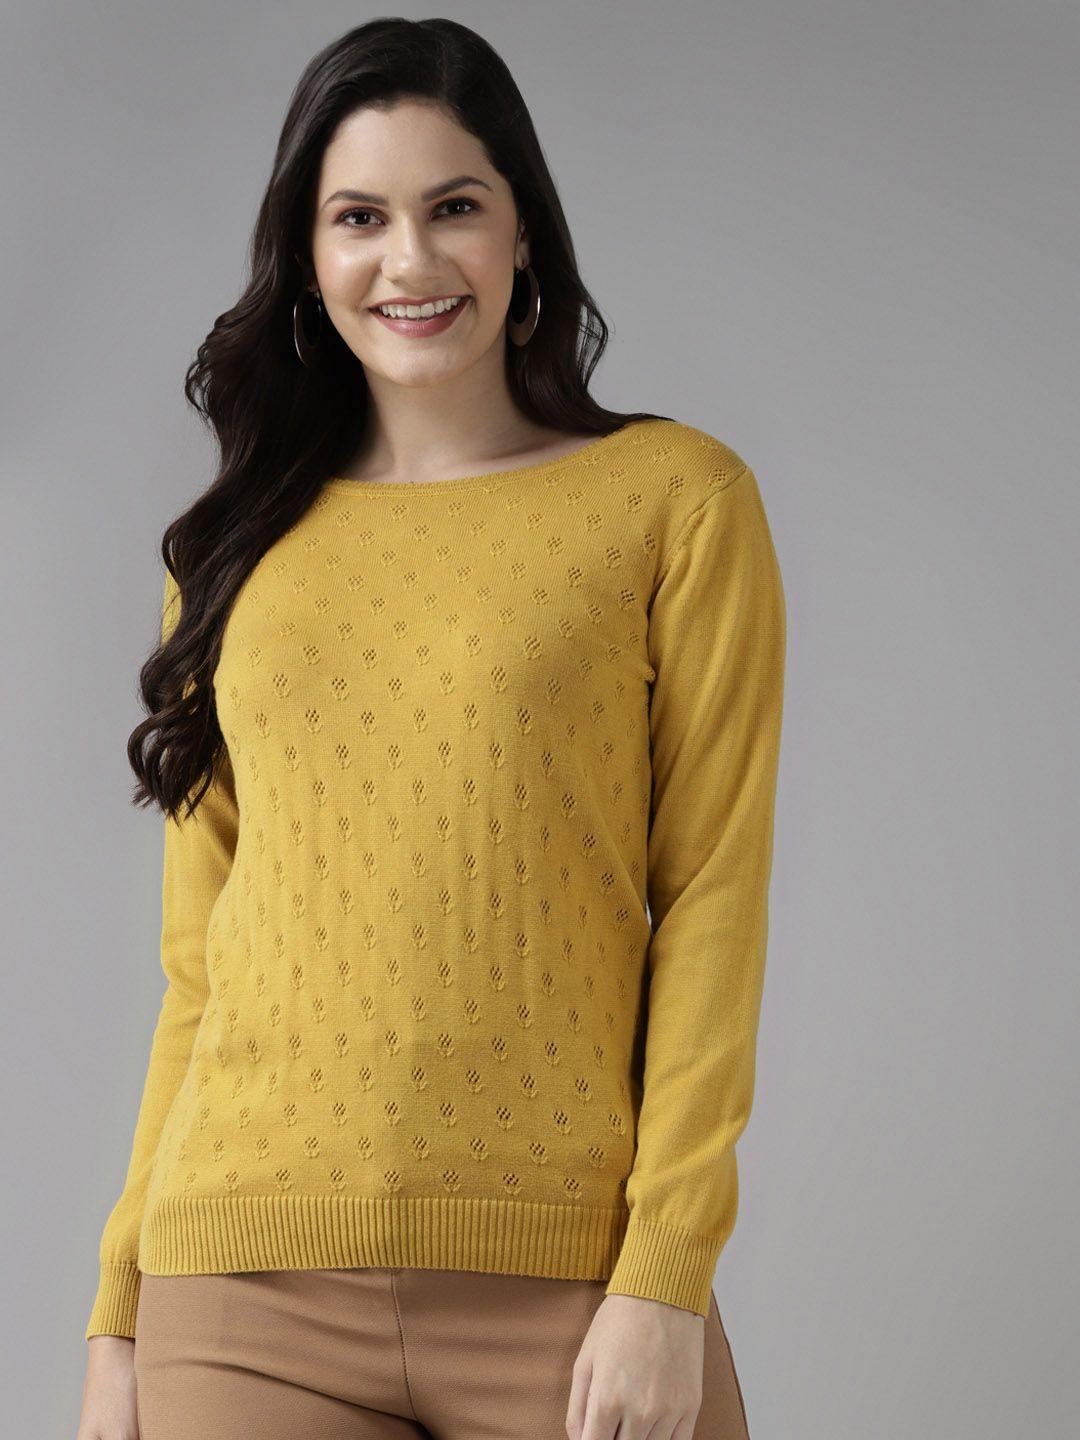 cayman-women-mustard-yellow-self-designed-floral-pullover-sweater